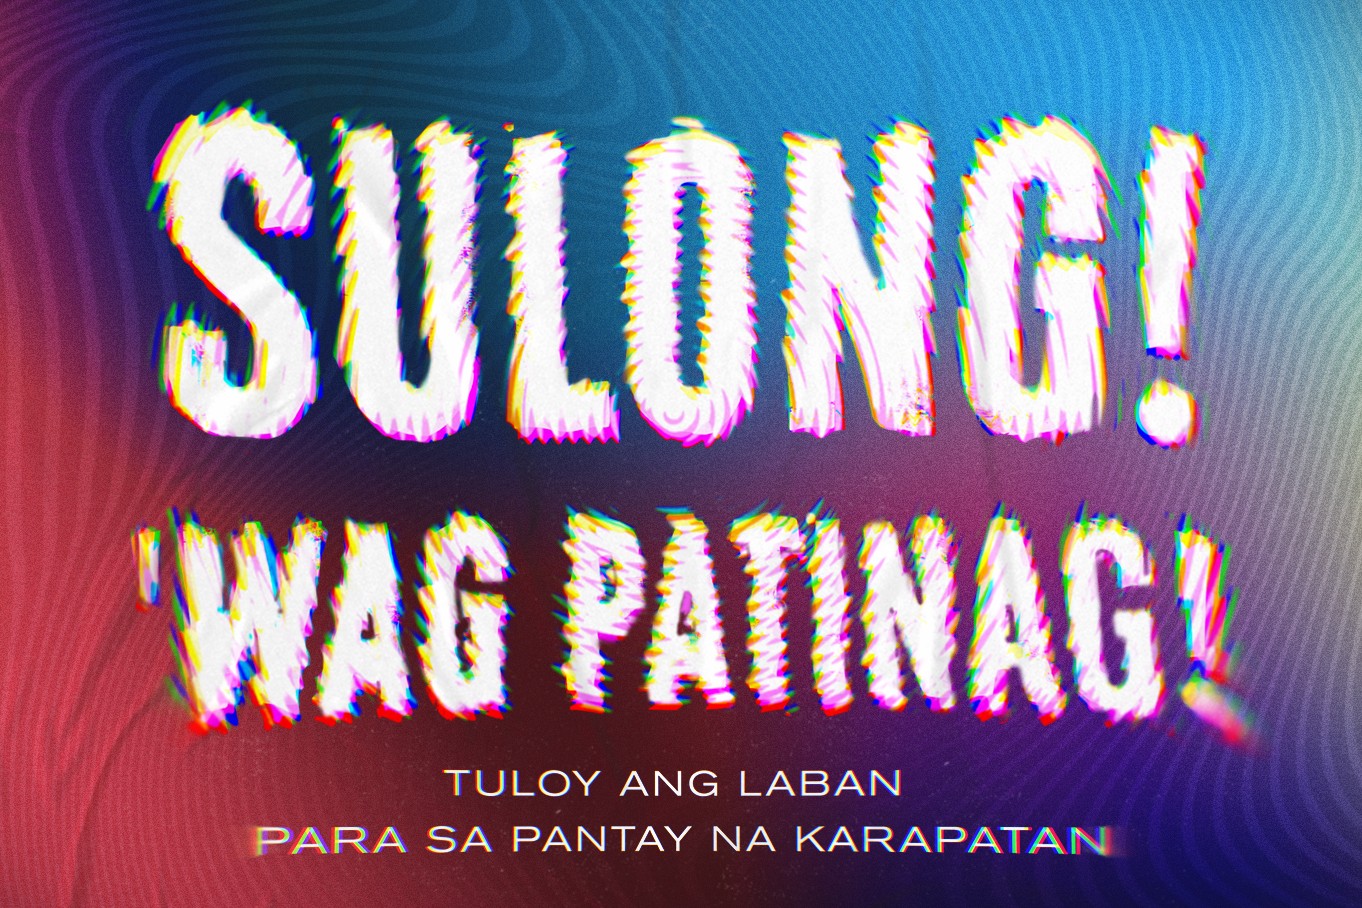 Image: A wide banner with vivid waves of red, blue, purple, yellow. Large text in the center reads 